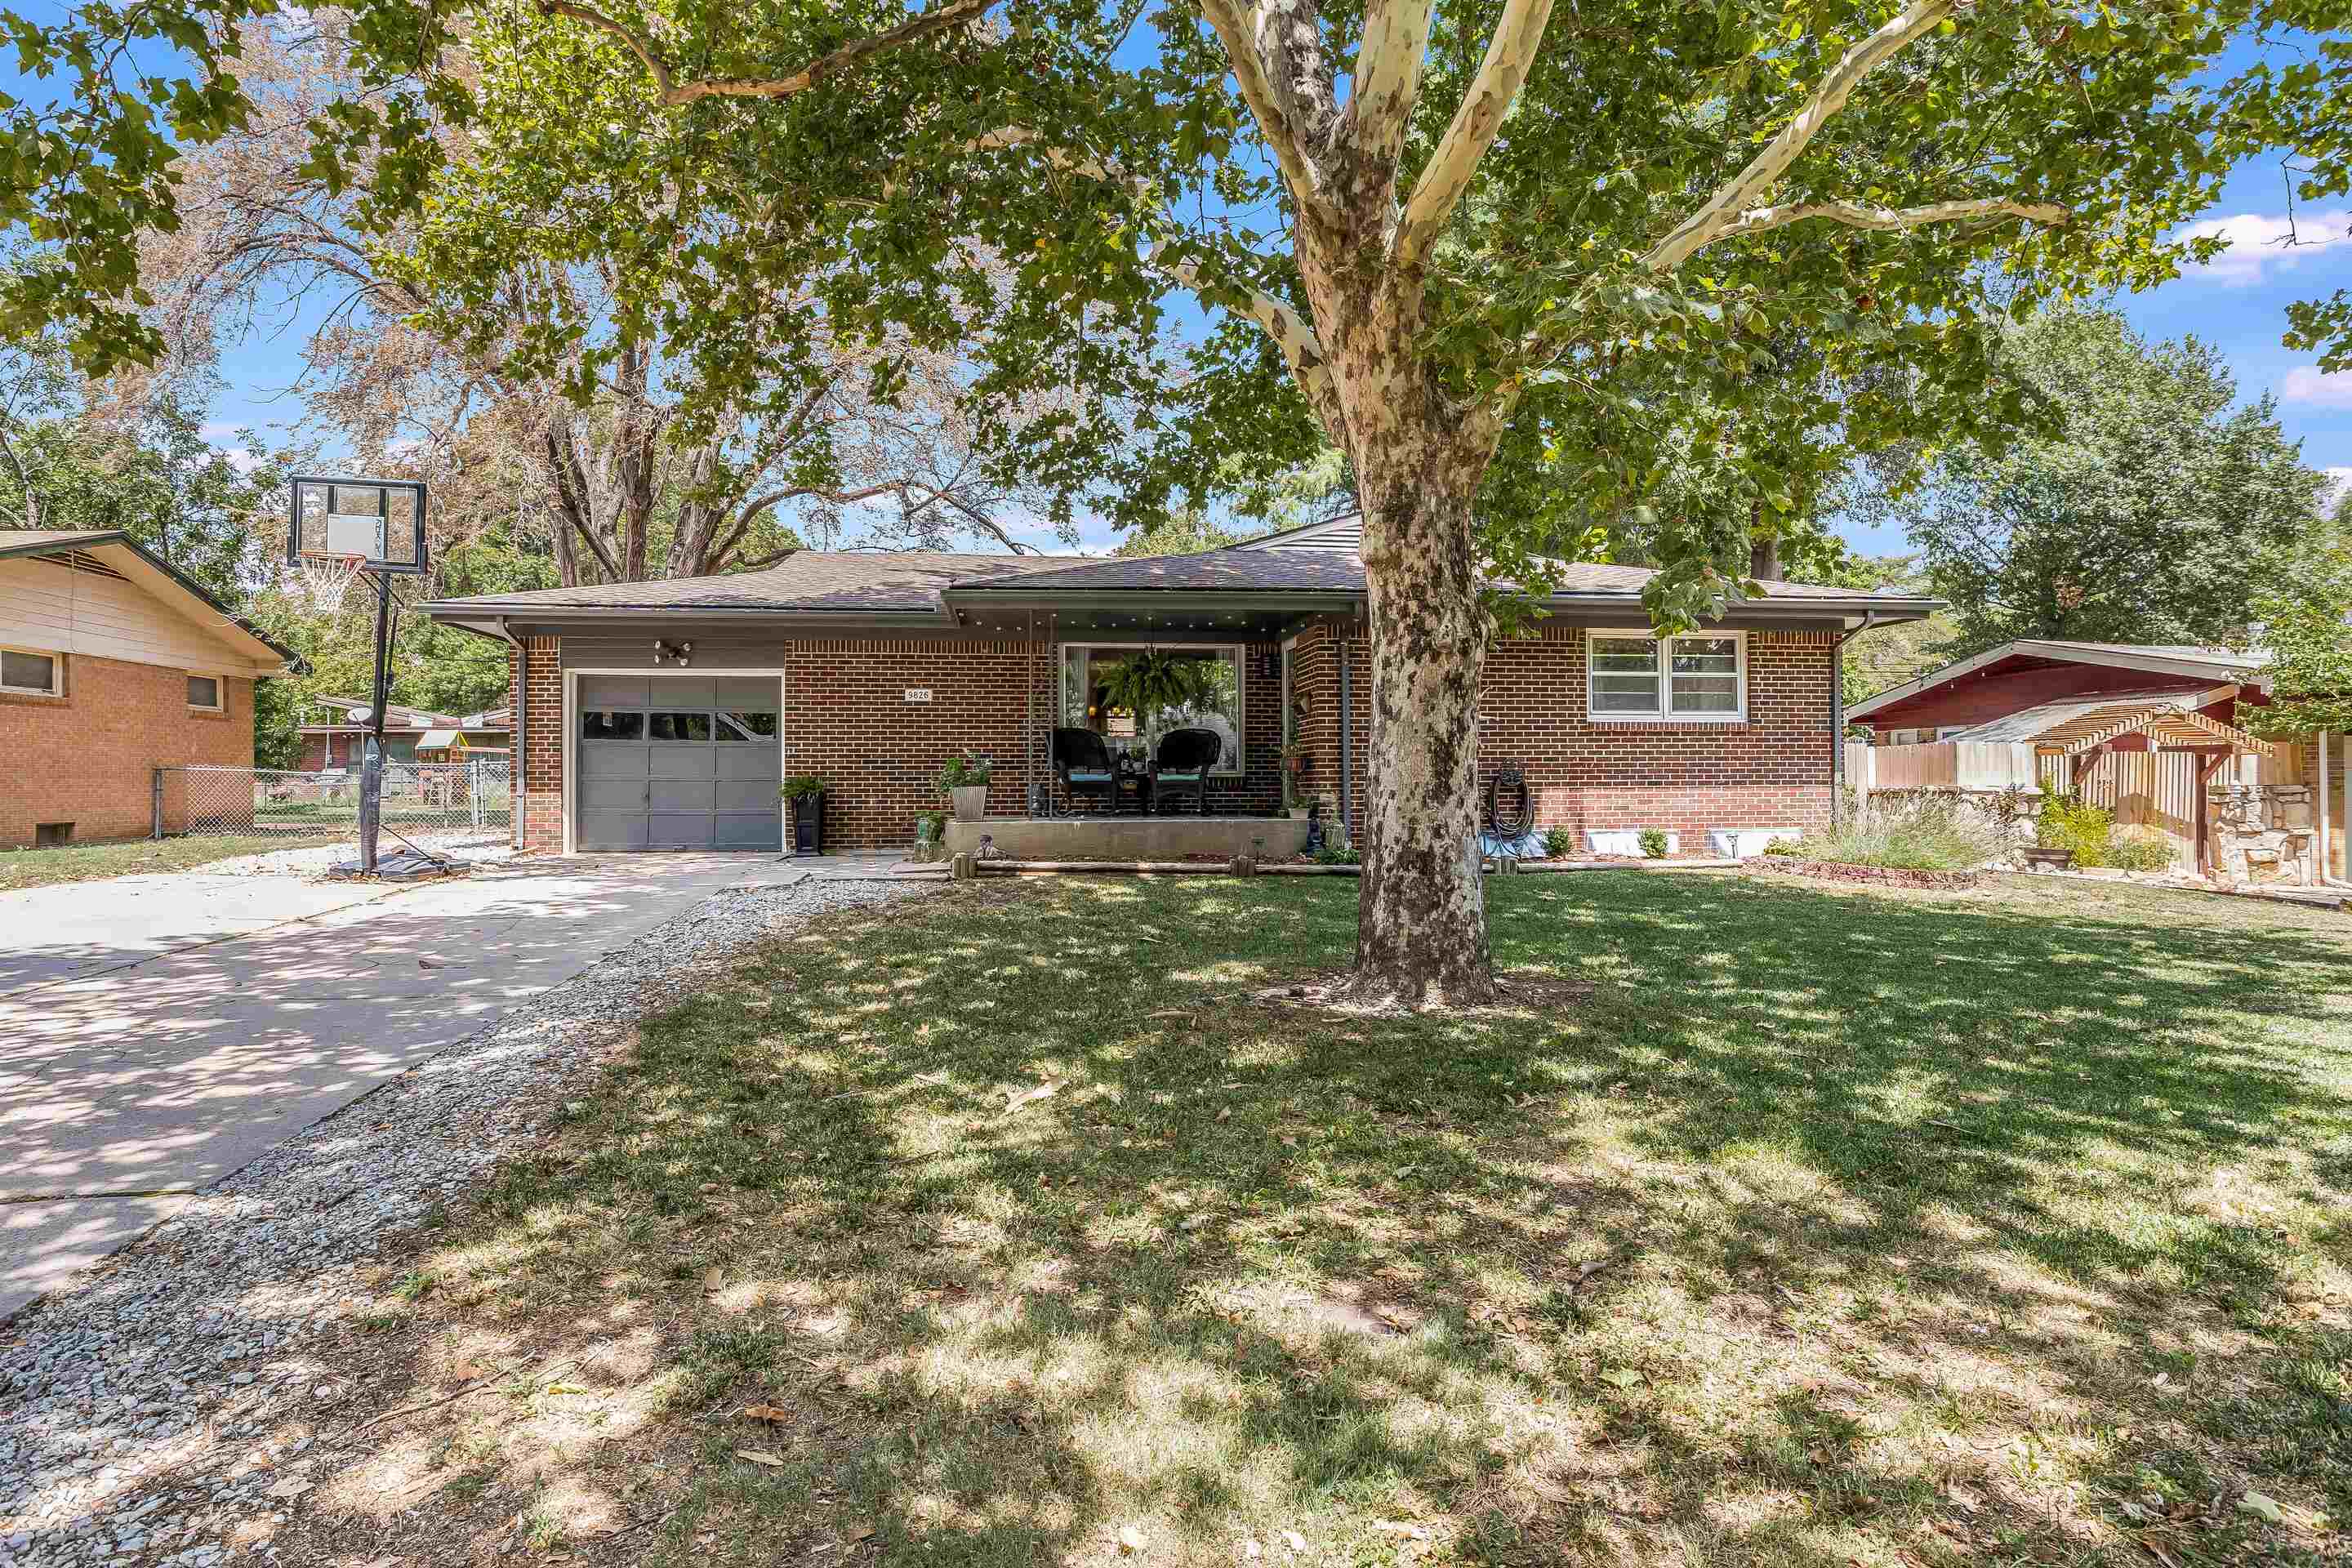 Darling all brick home in the Westlink neighborhood. Step into a large family room as you enter this